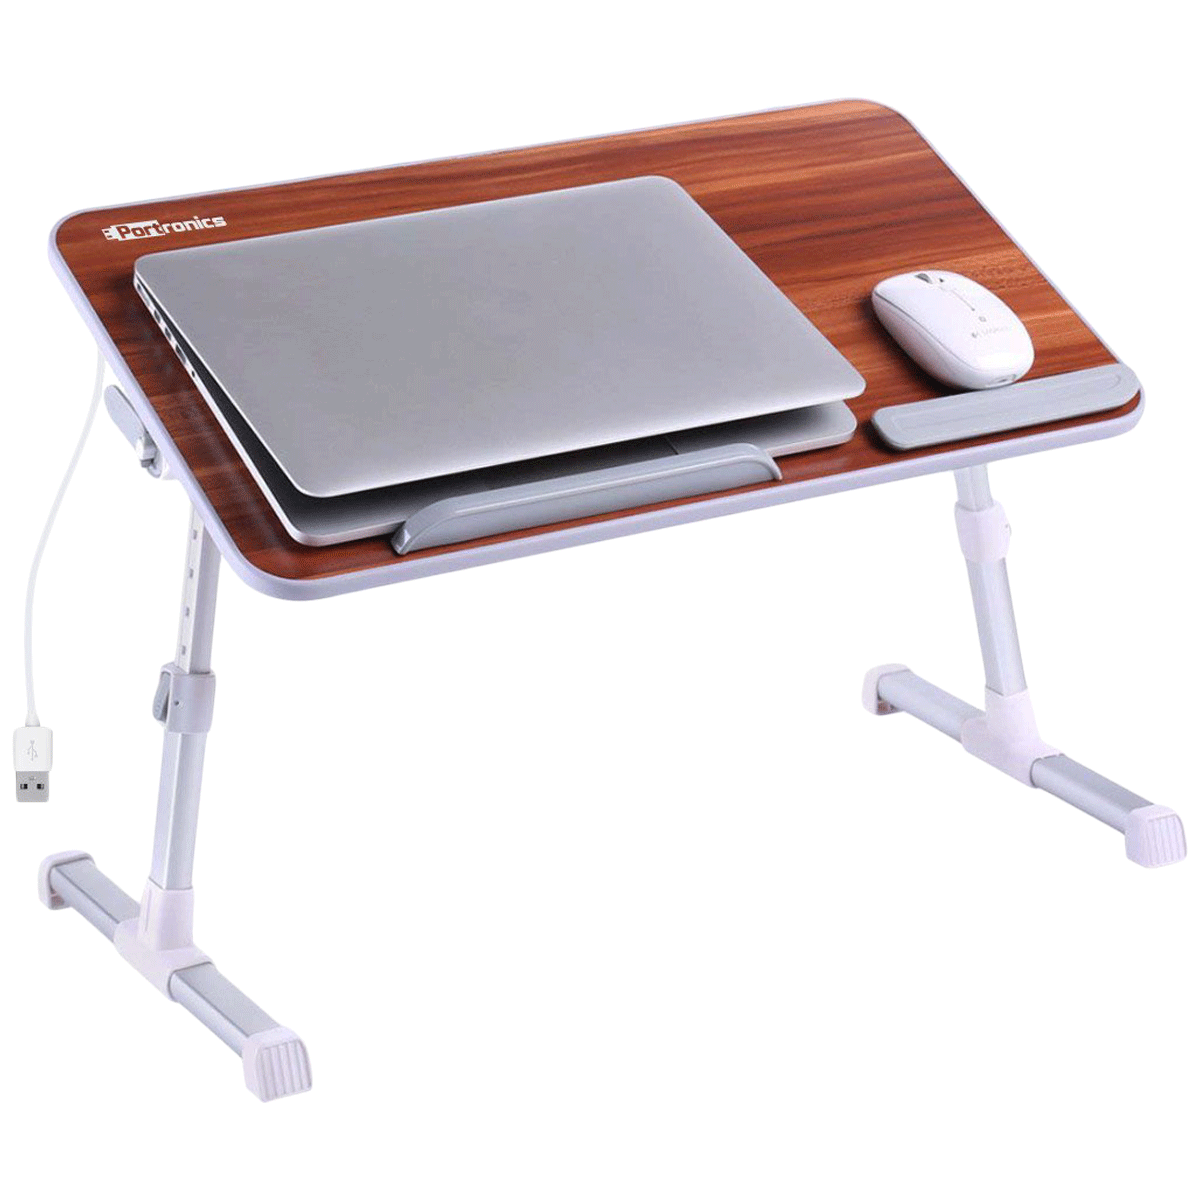 PORTRONICS My Buddy Plus Portable Laptop Stand (USB 2.0 Connector, POR-895, Brown)